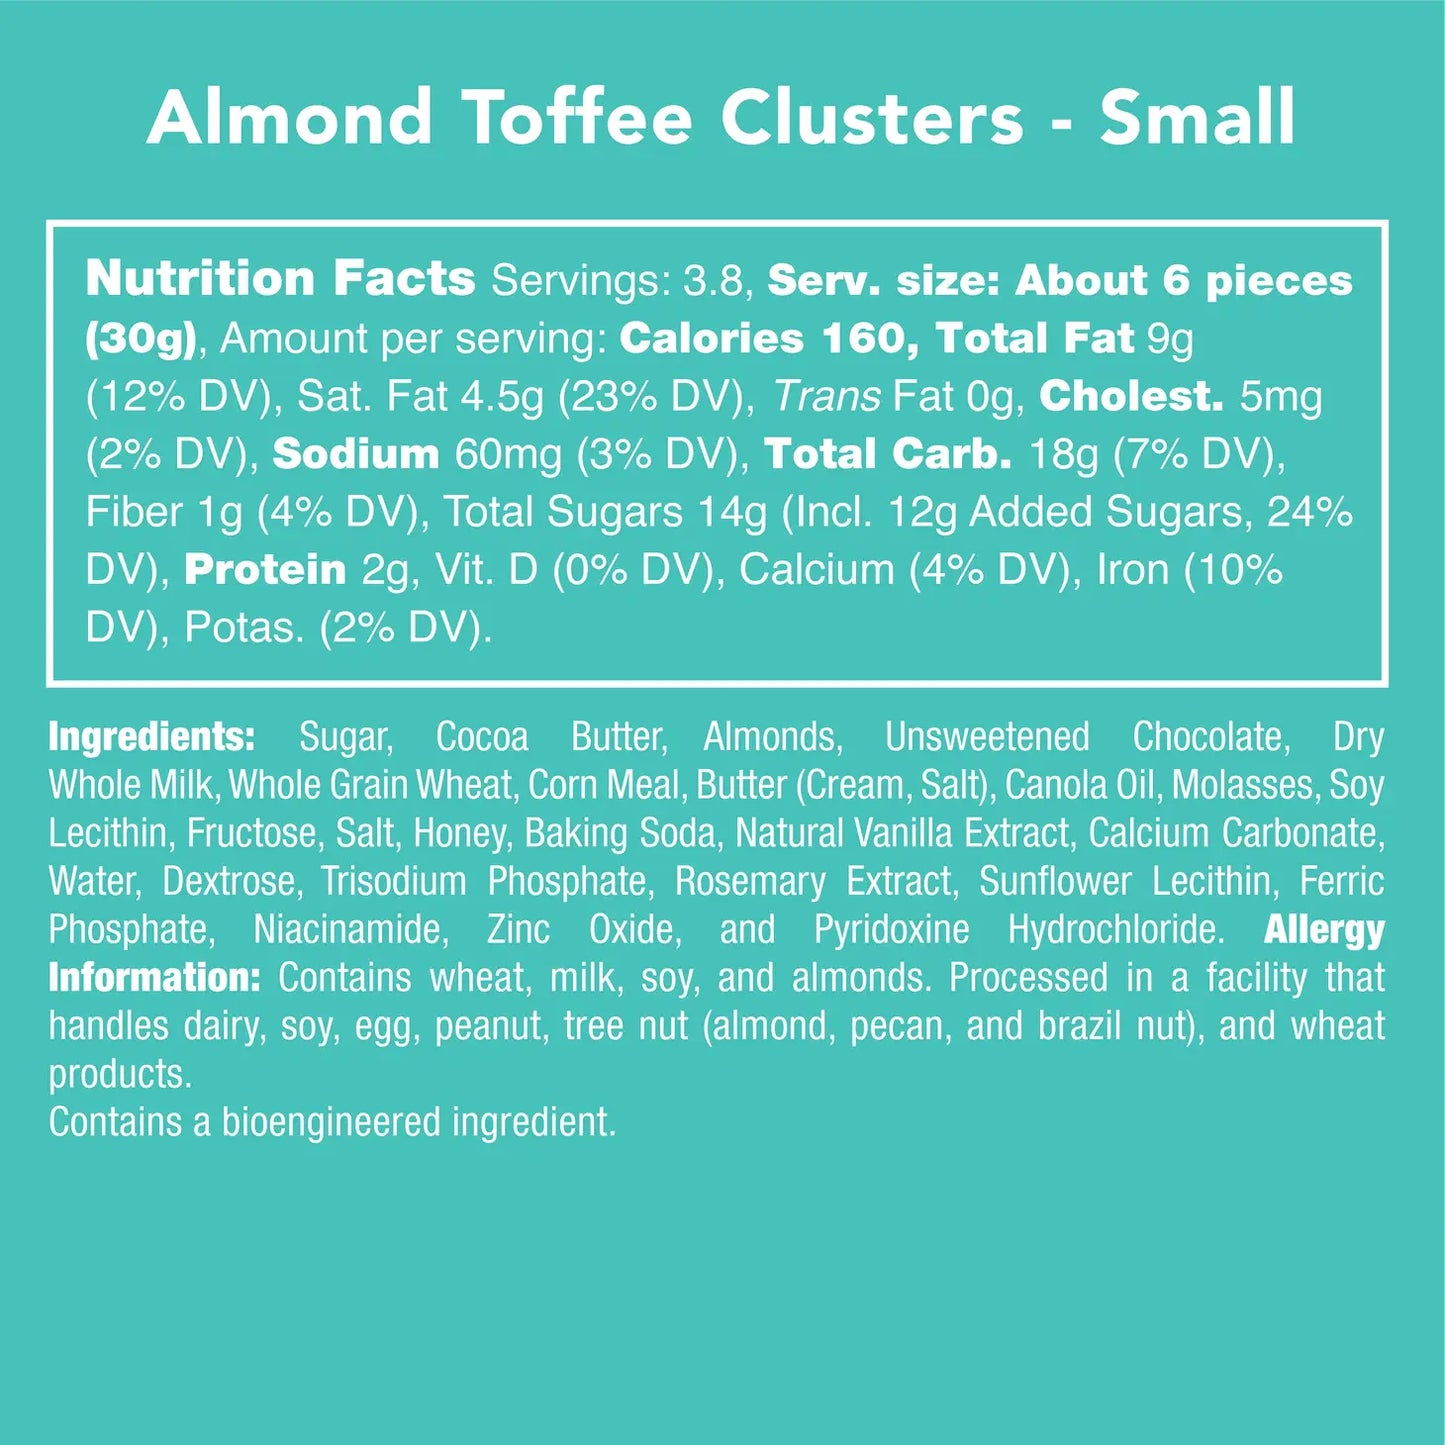 Almond Toffee Clusters